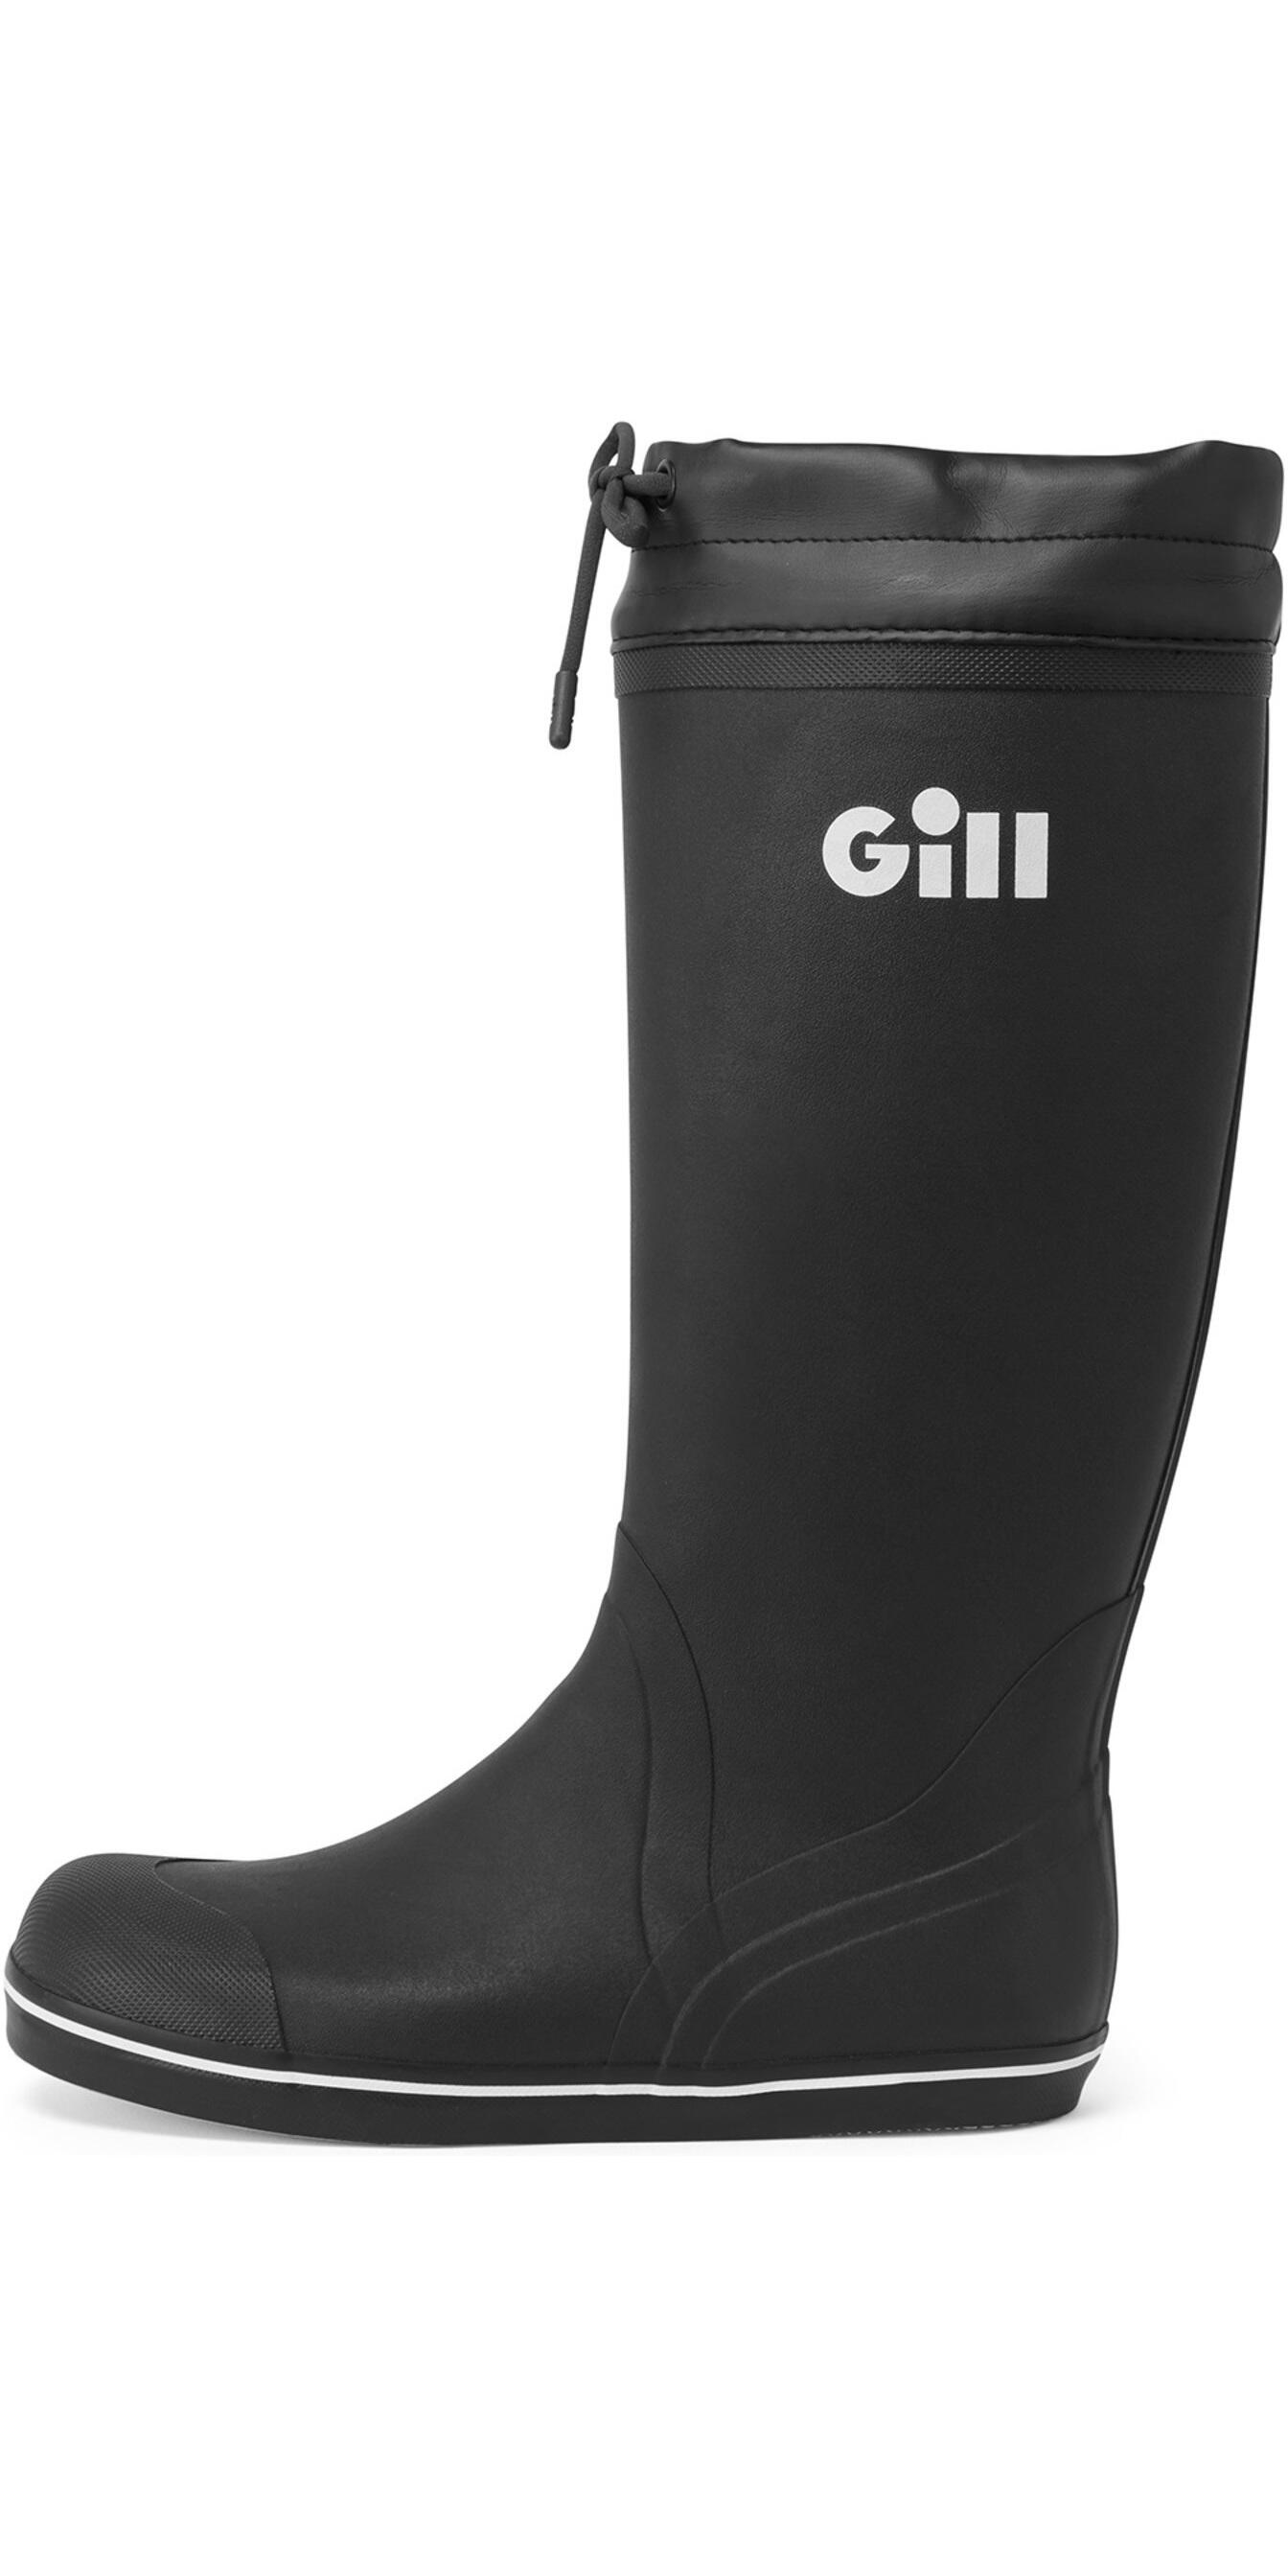 GILL Gill Tall Yachting Boot